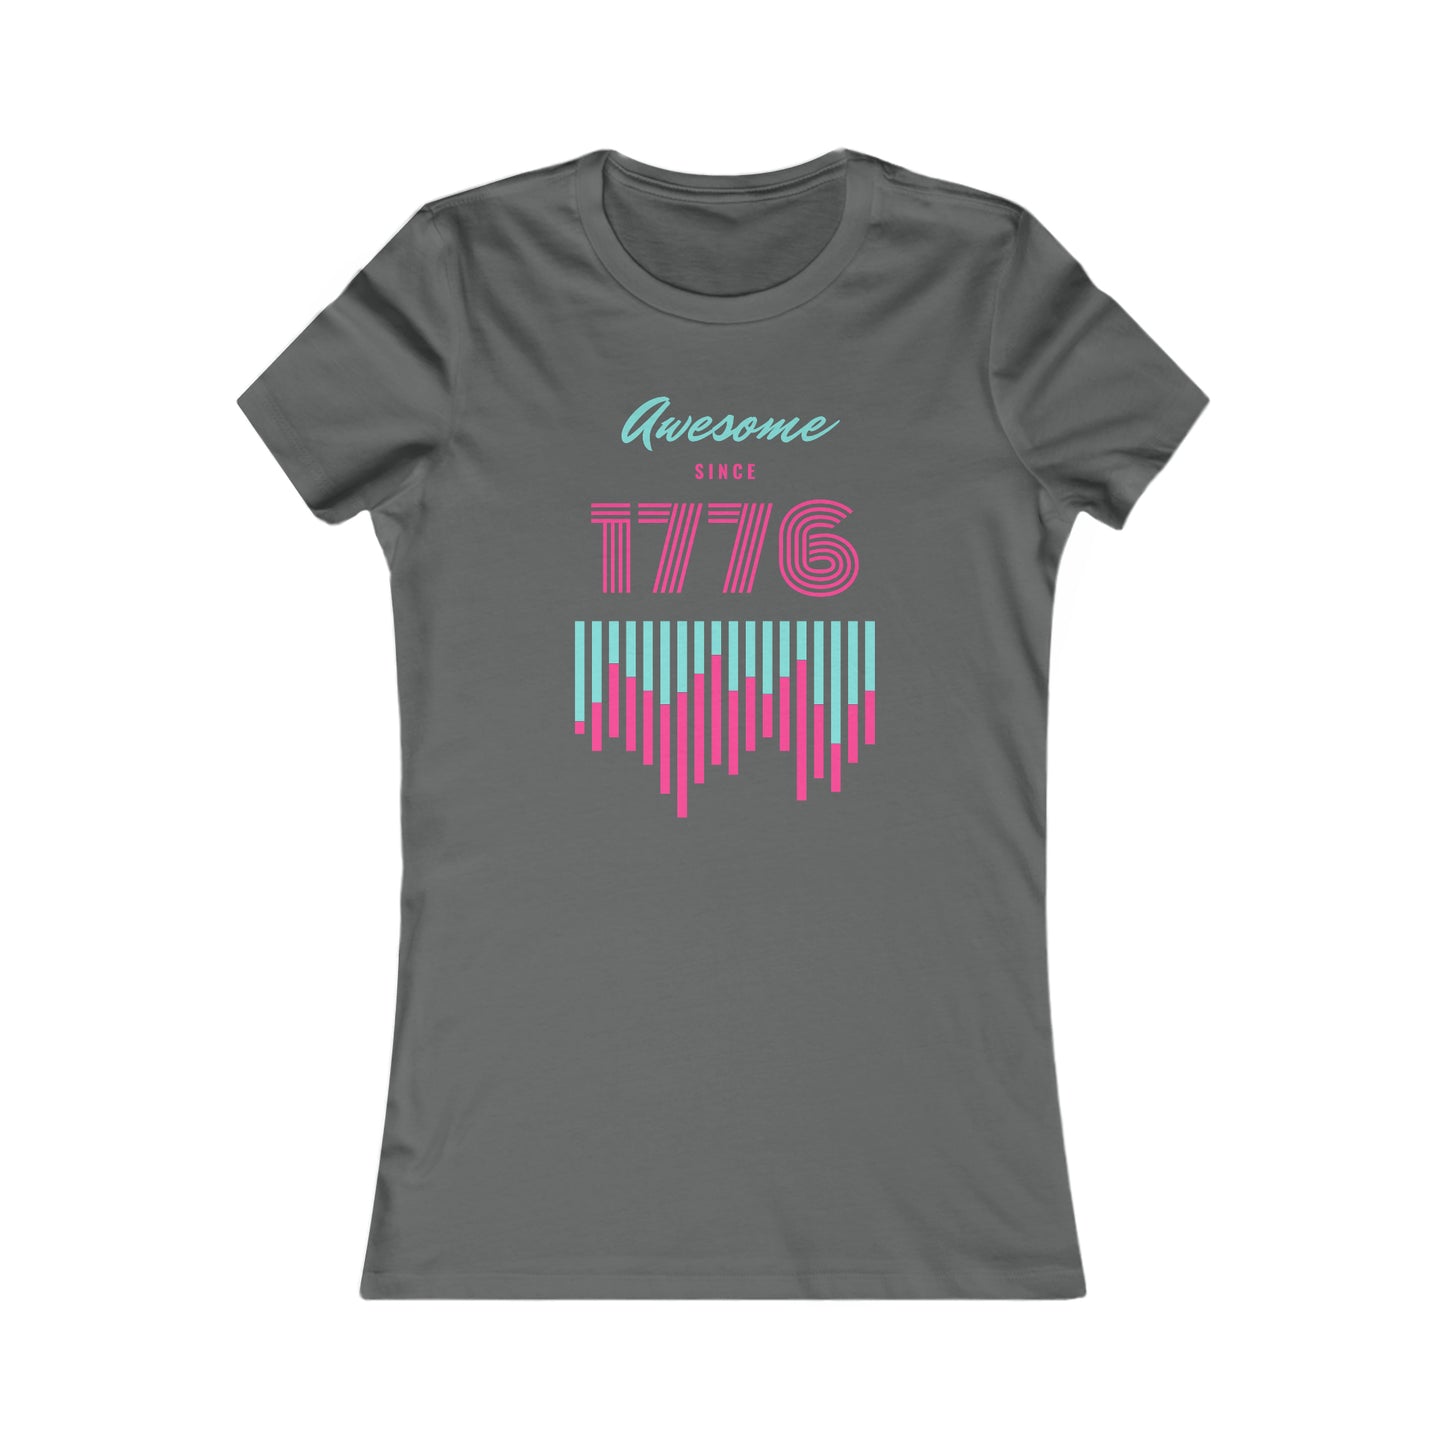 Awesome 1776 - Women's Favorite Tee